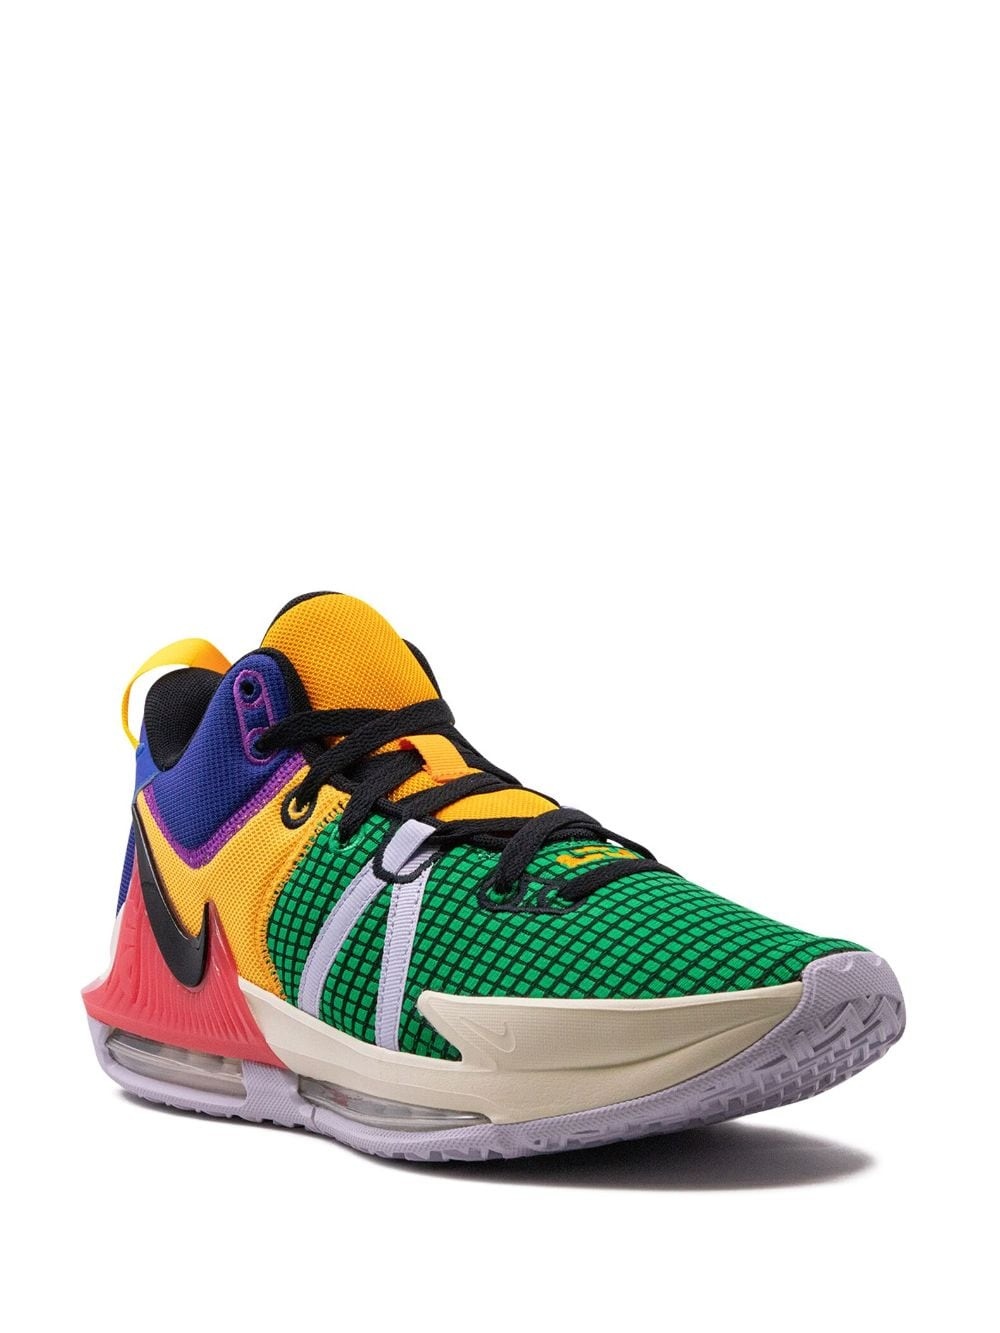 LeBron Witness 7 "Multi Color" sneakers - 2